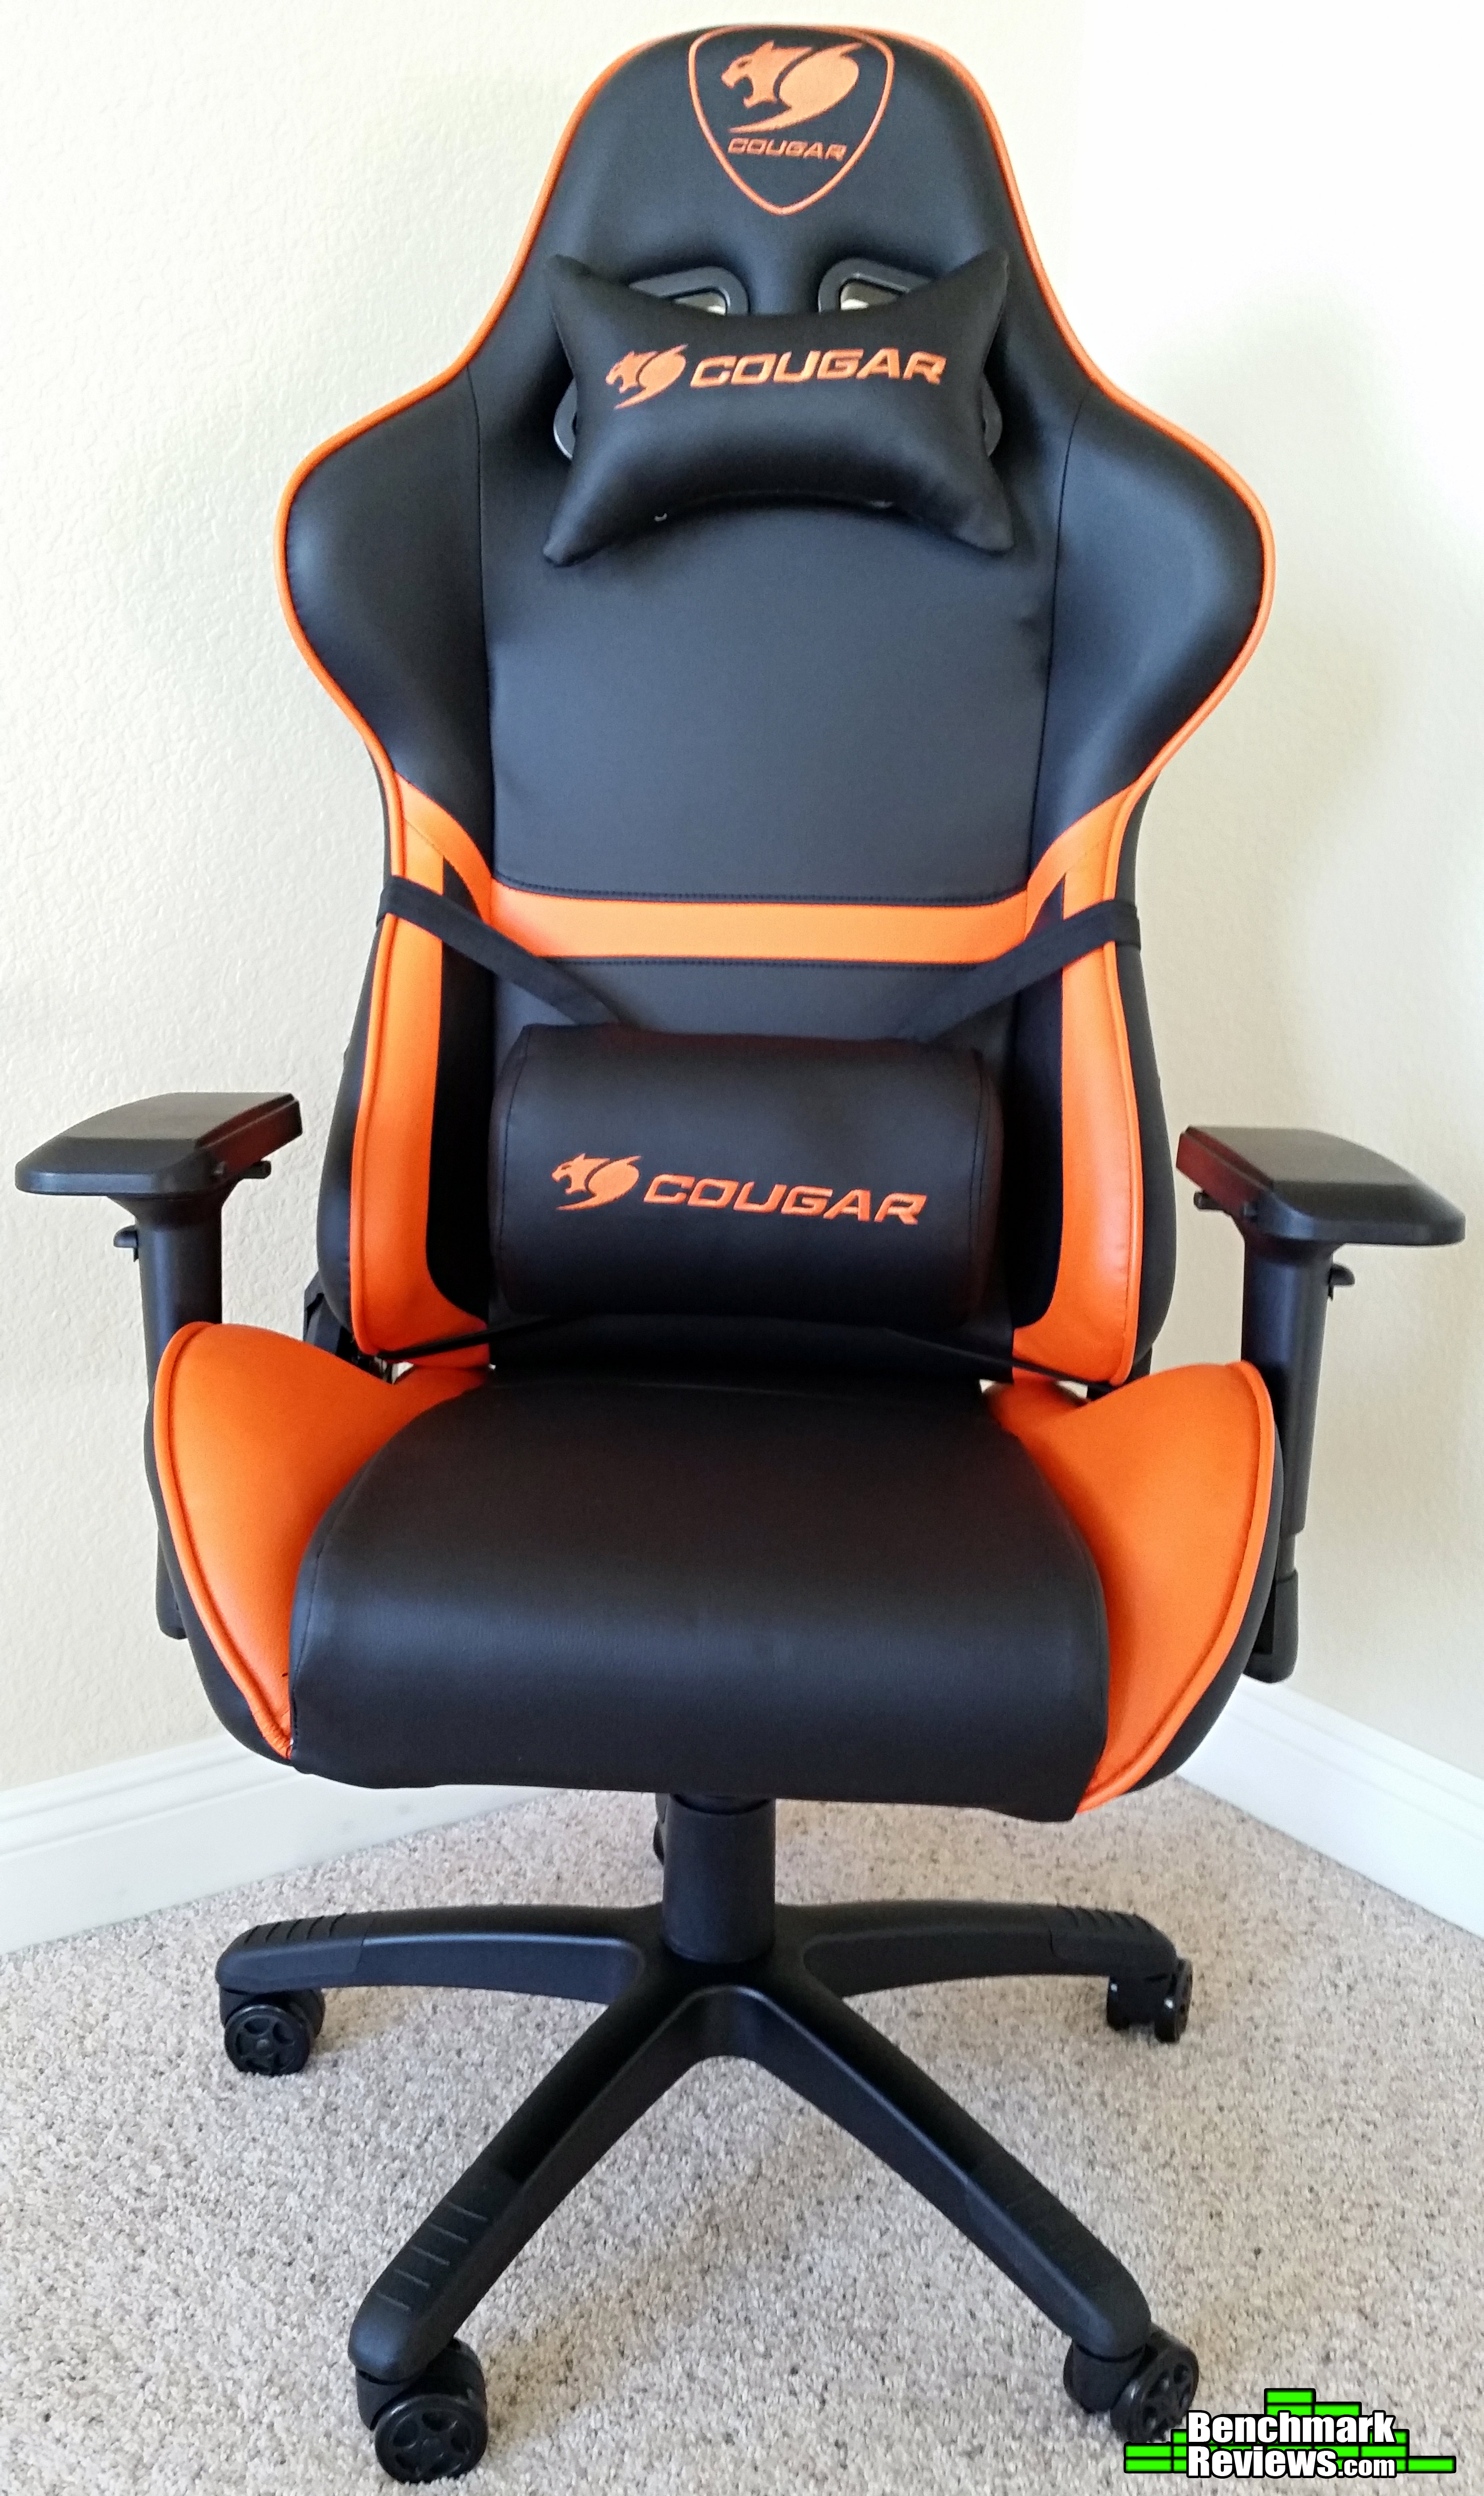 Cougar Armor Gaming Chair - Comfort, With Some Drawbacks